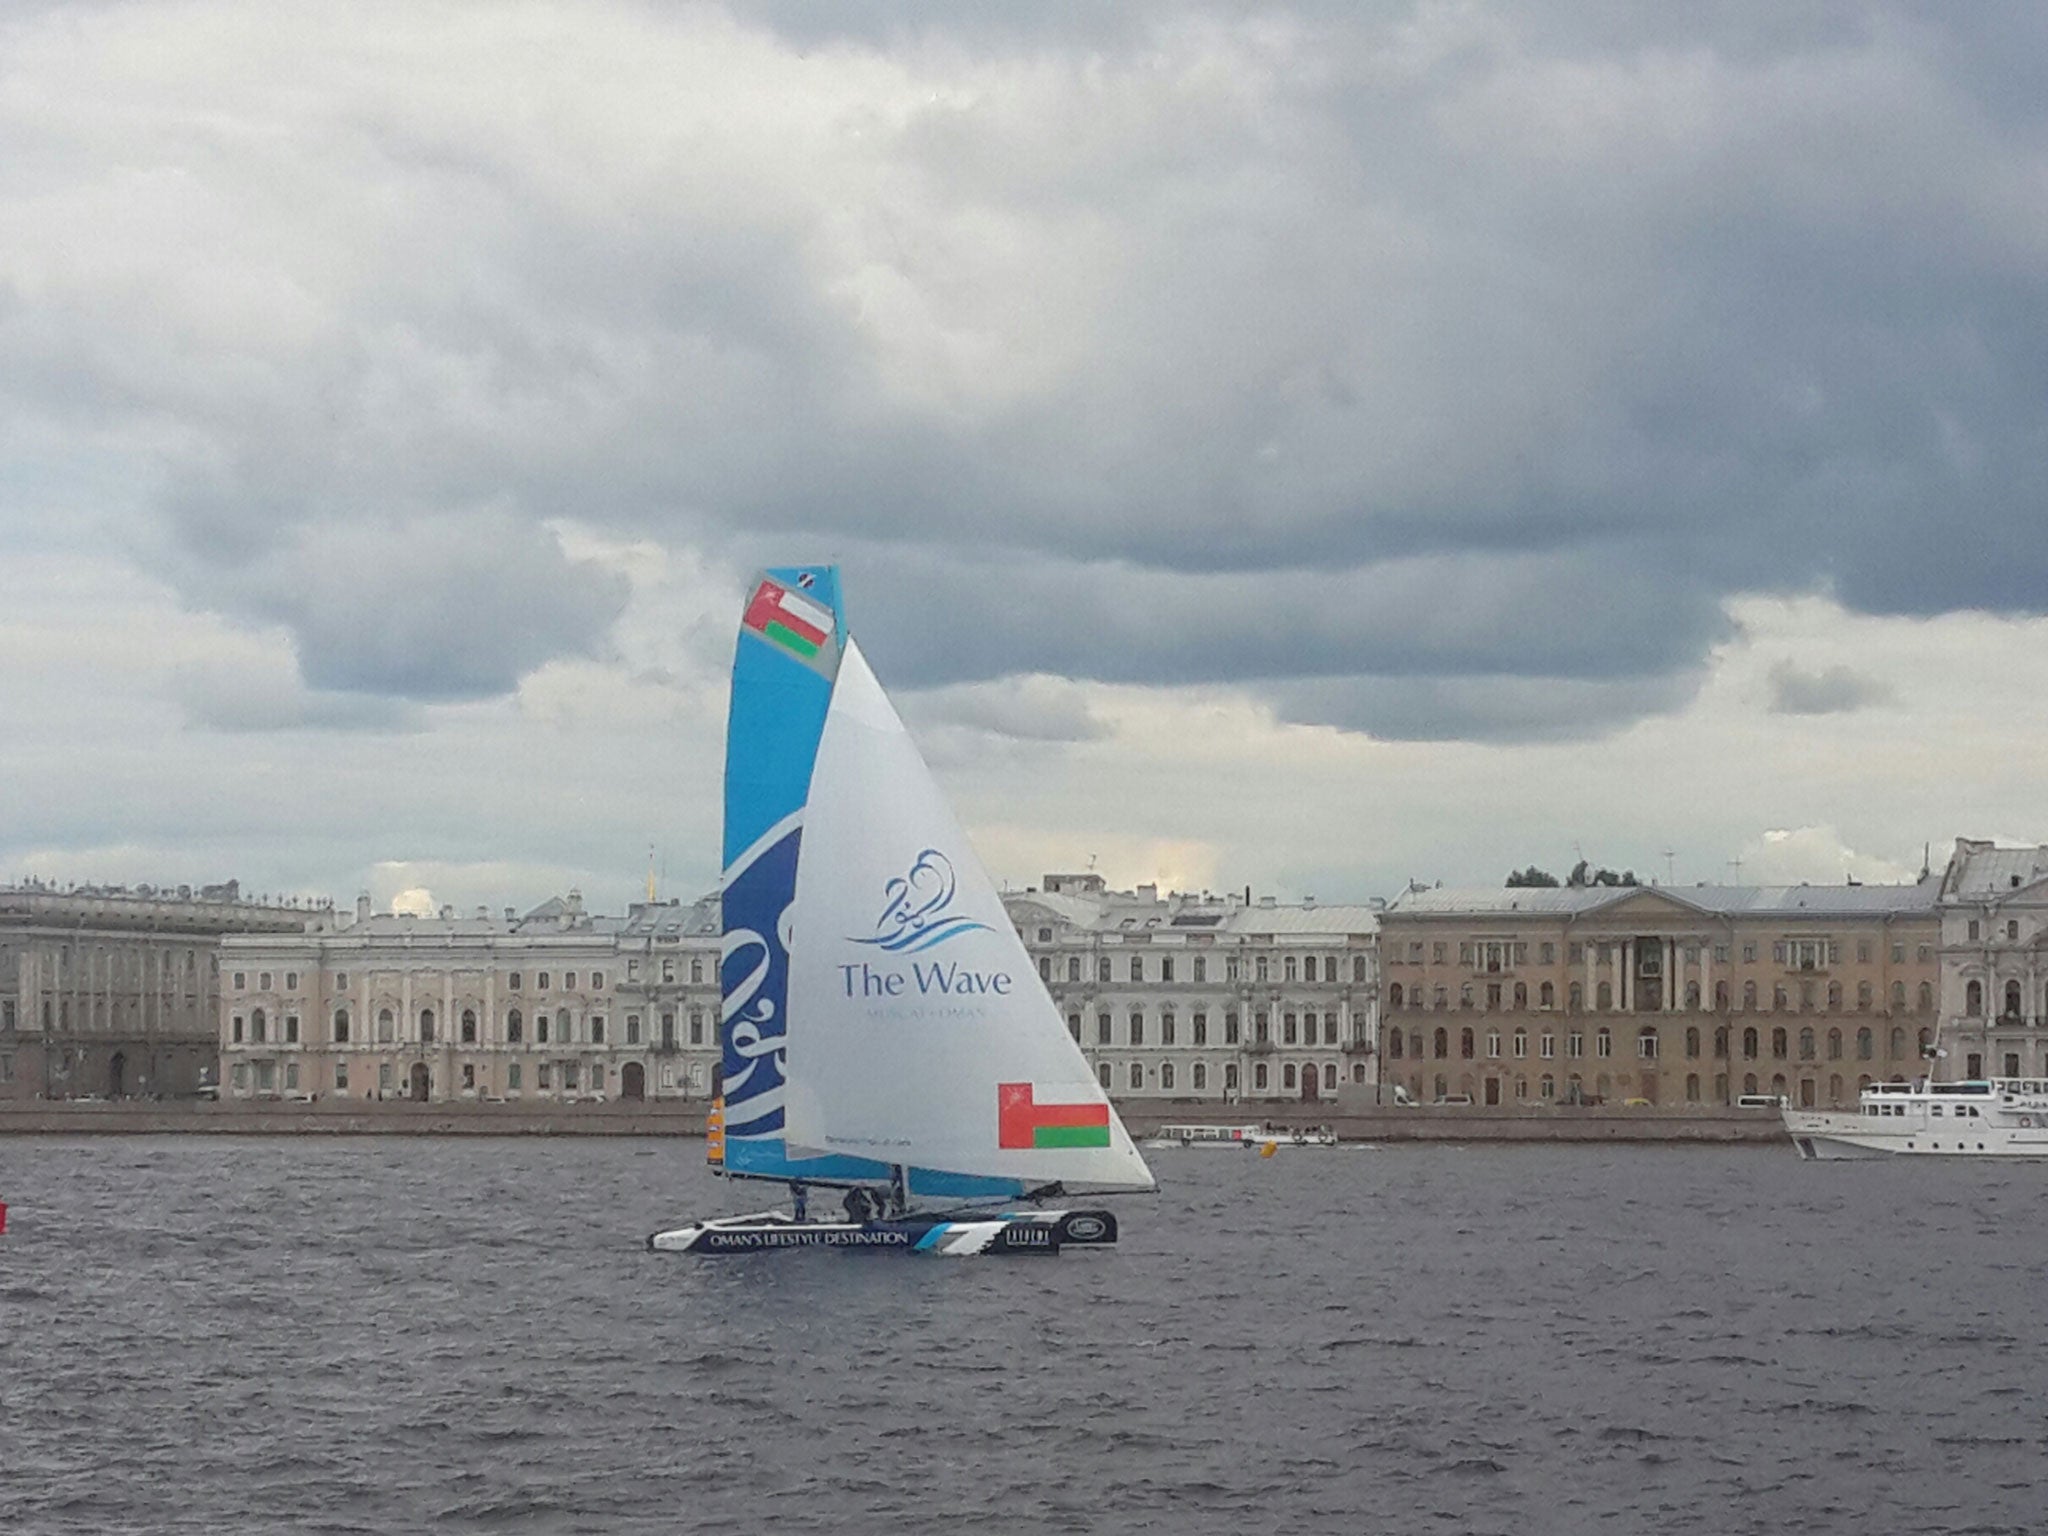 Out on its own, defending champion The Wave, Muscat, skippered by Leigh McMillan and with double gold medallist Sarah Ayton in the crew, trounced the opposition on the first race of the day in the Extreme Sailing Series on the Neva River, St. Petersburg.